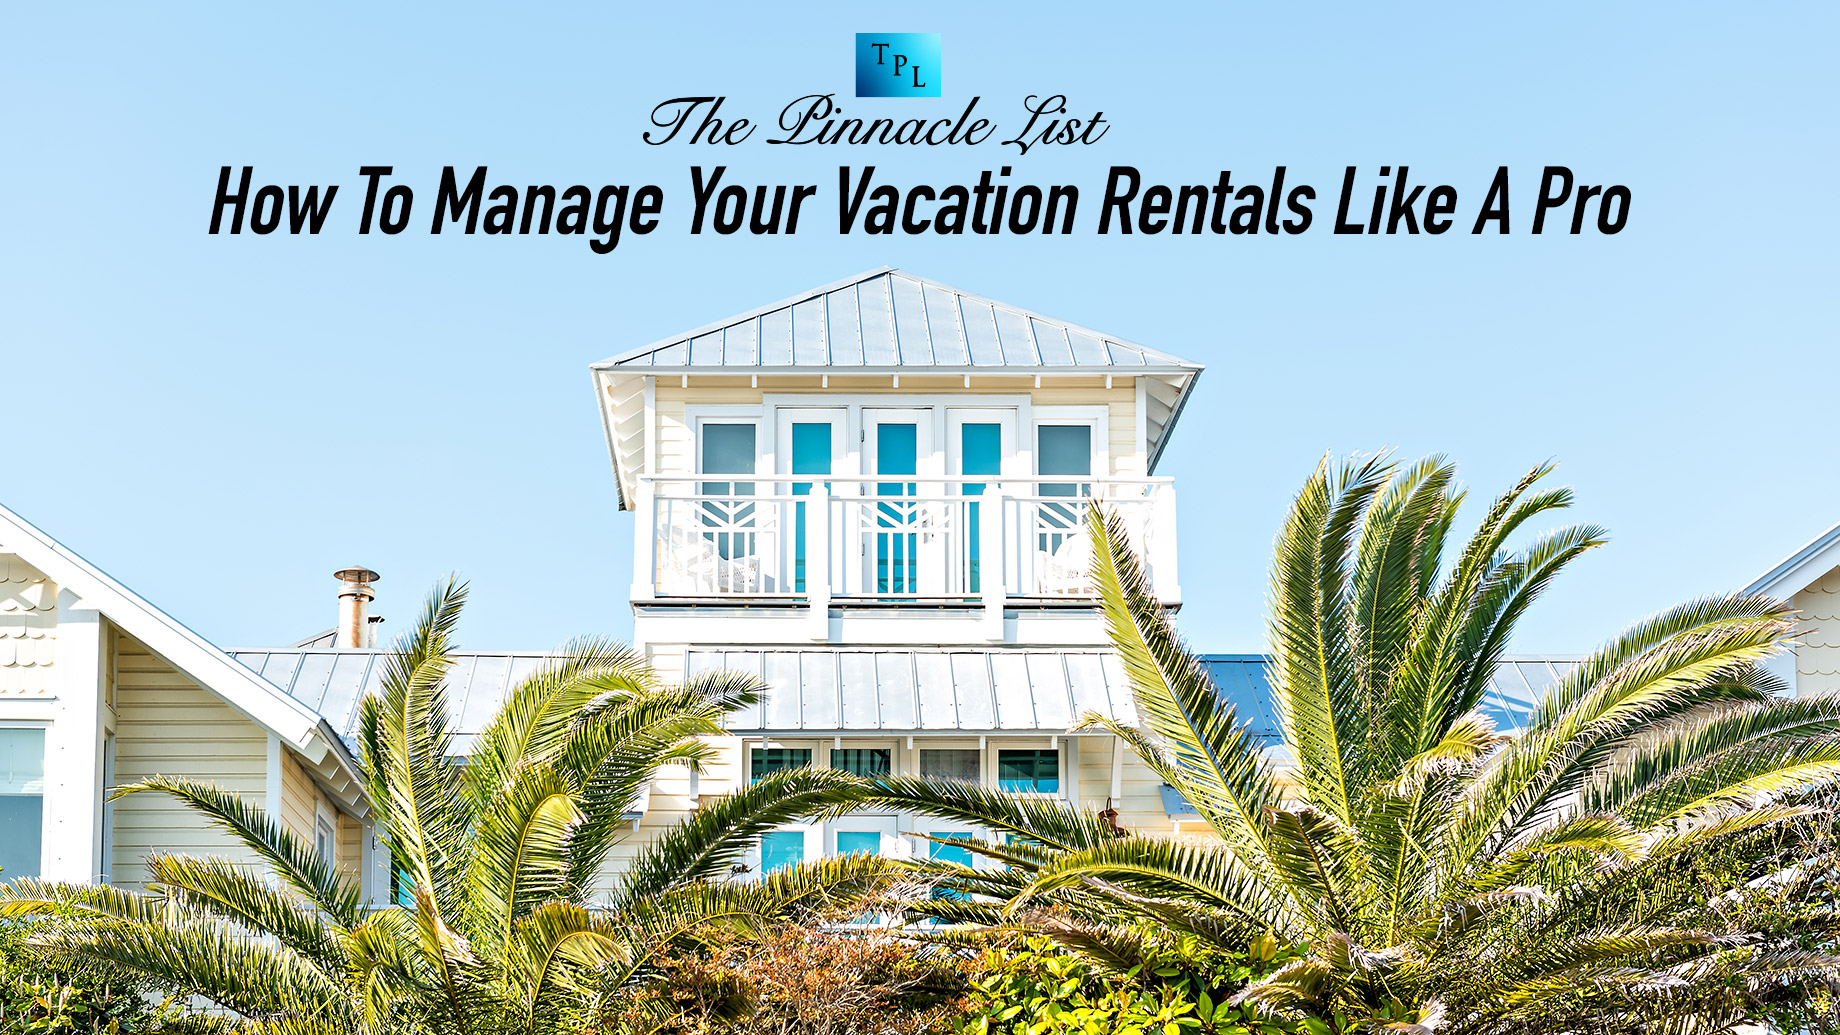 How To Manage Your Vacation Rentals Like A Pro